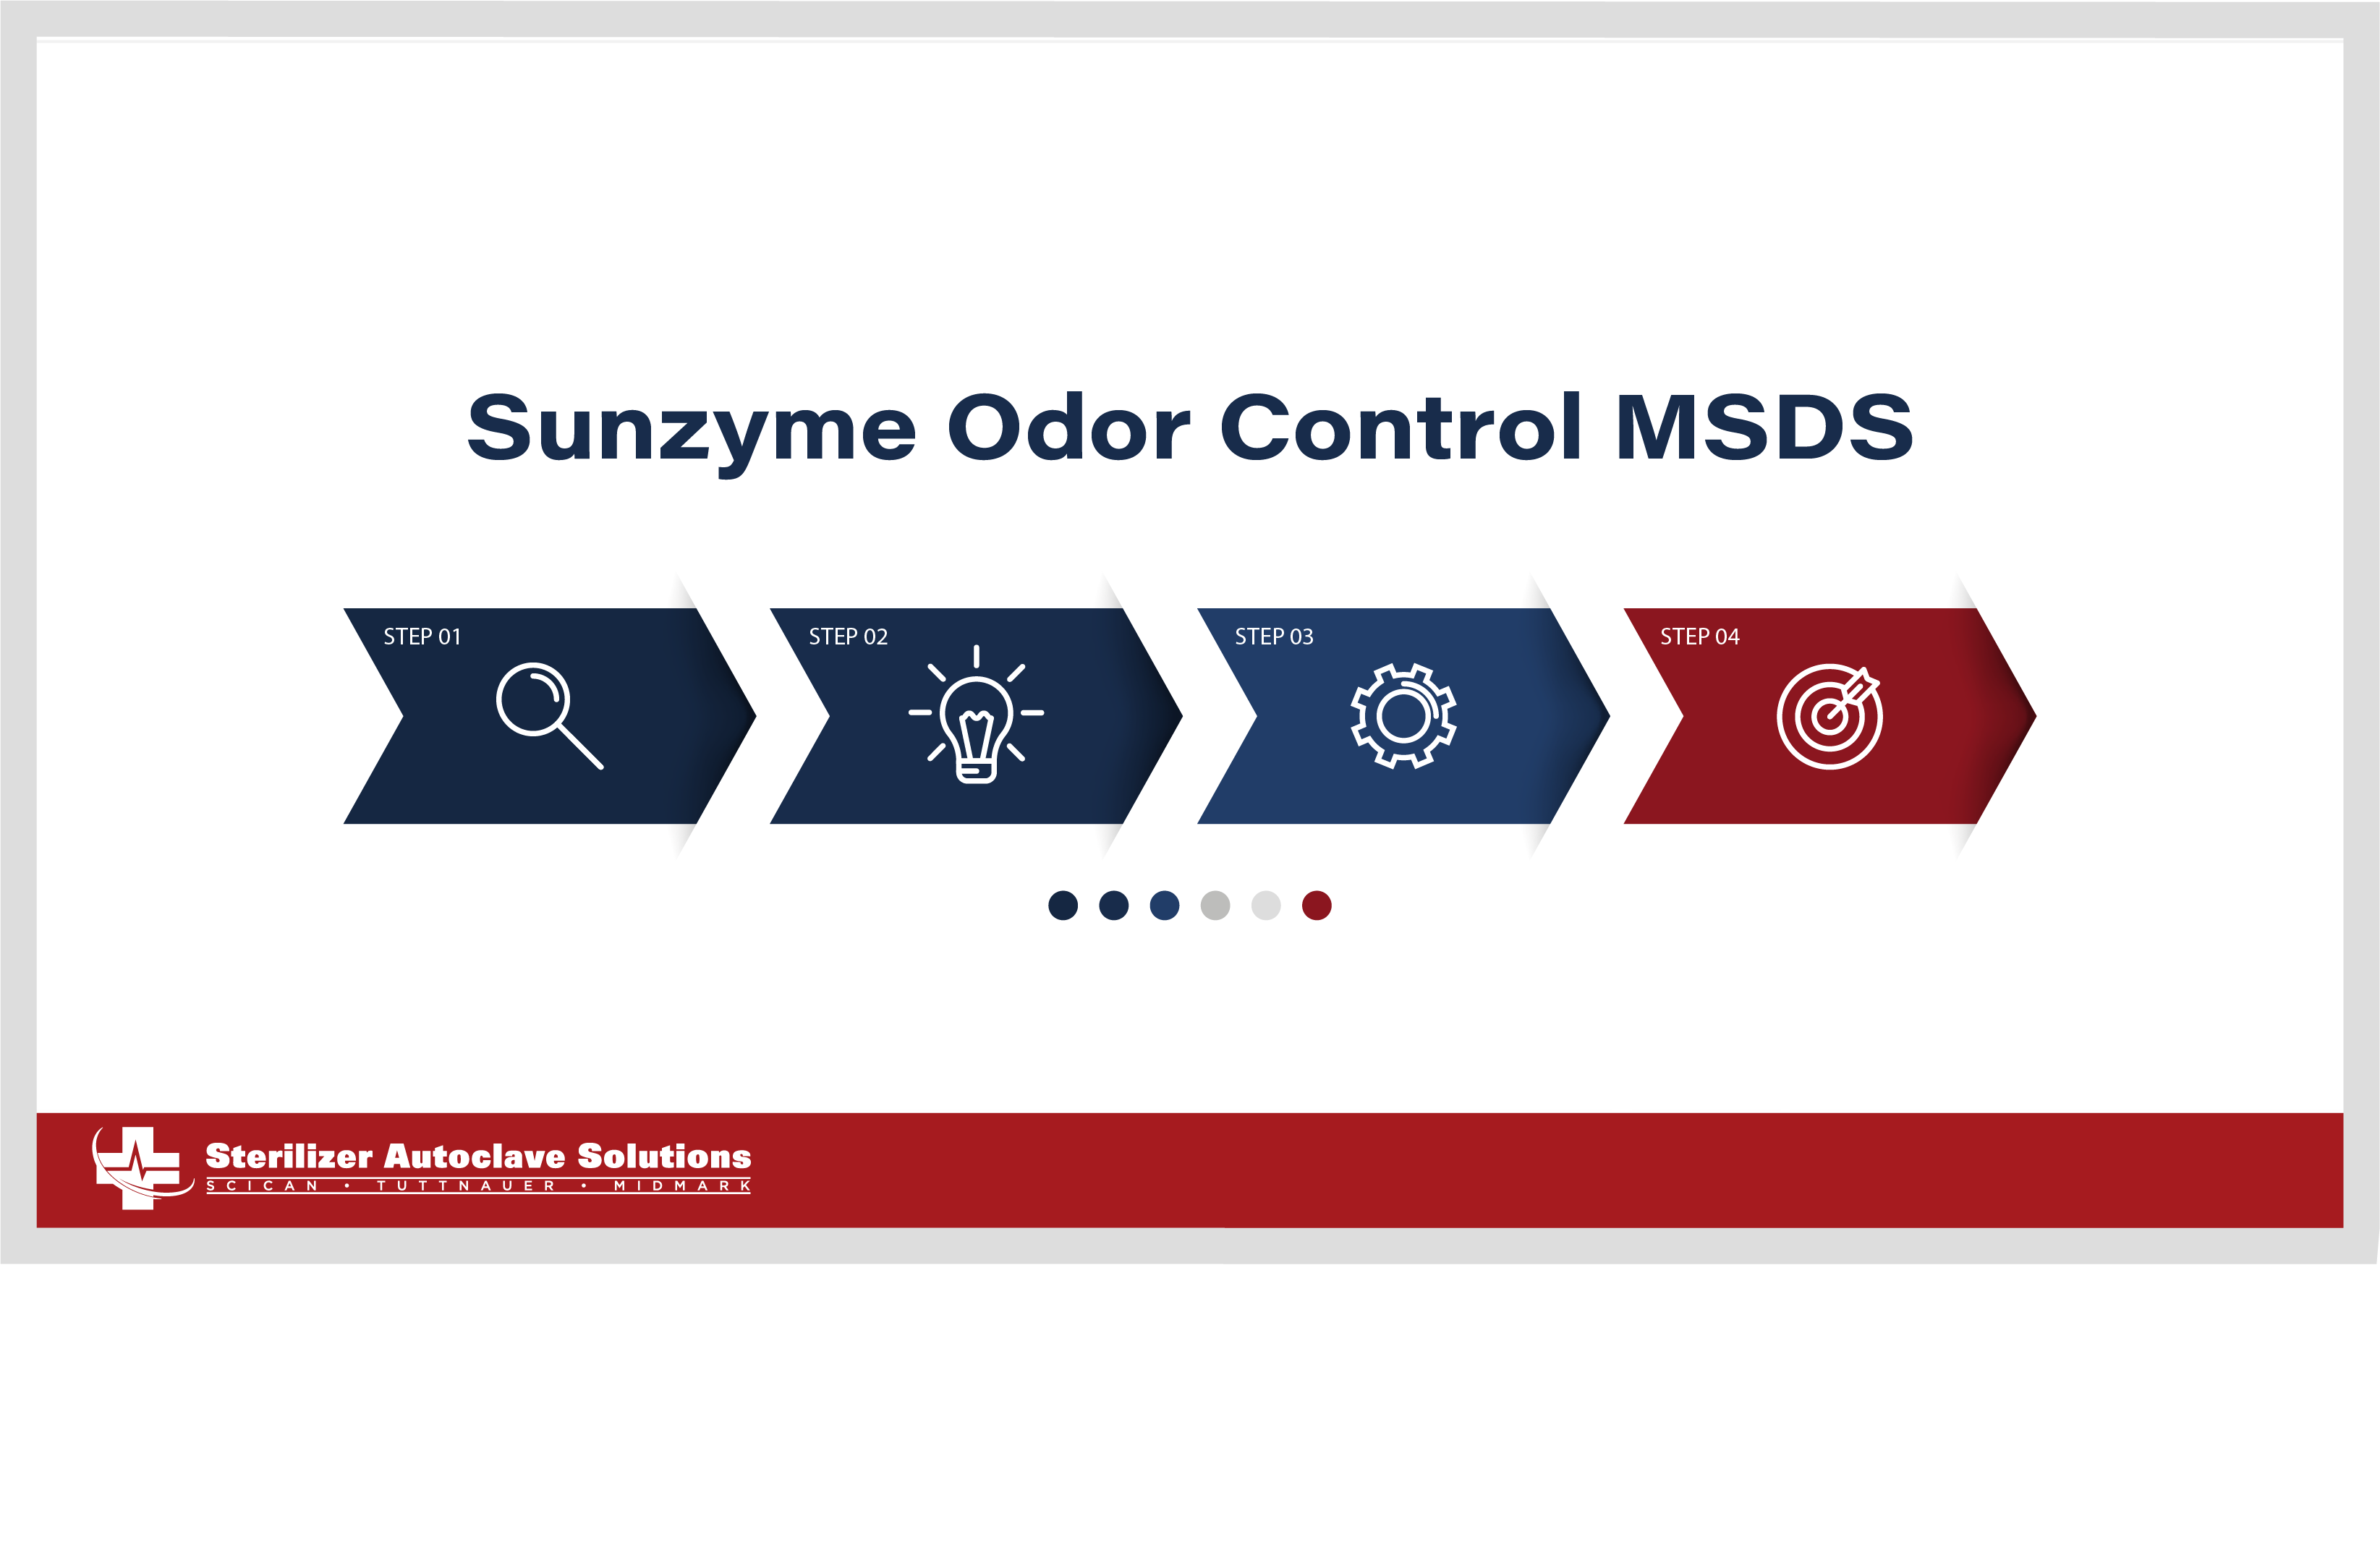 This is the Sunzyme Odor MSDS.